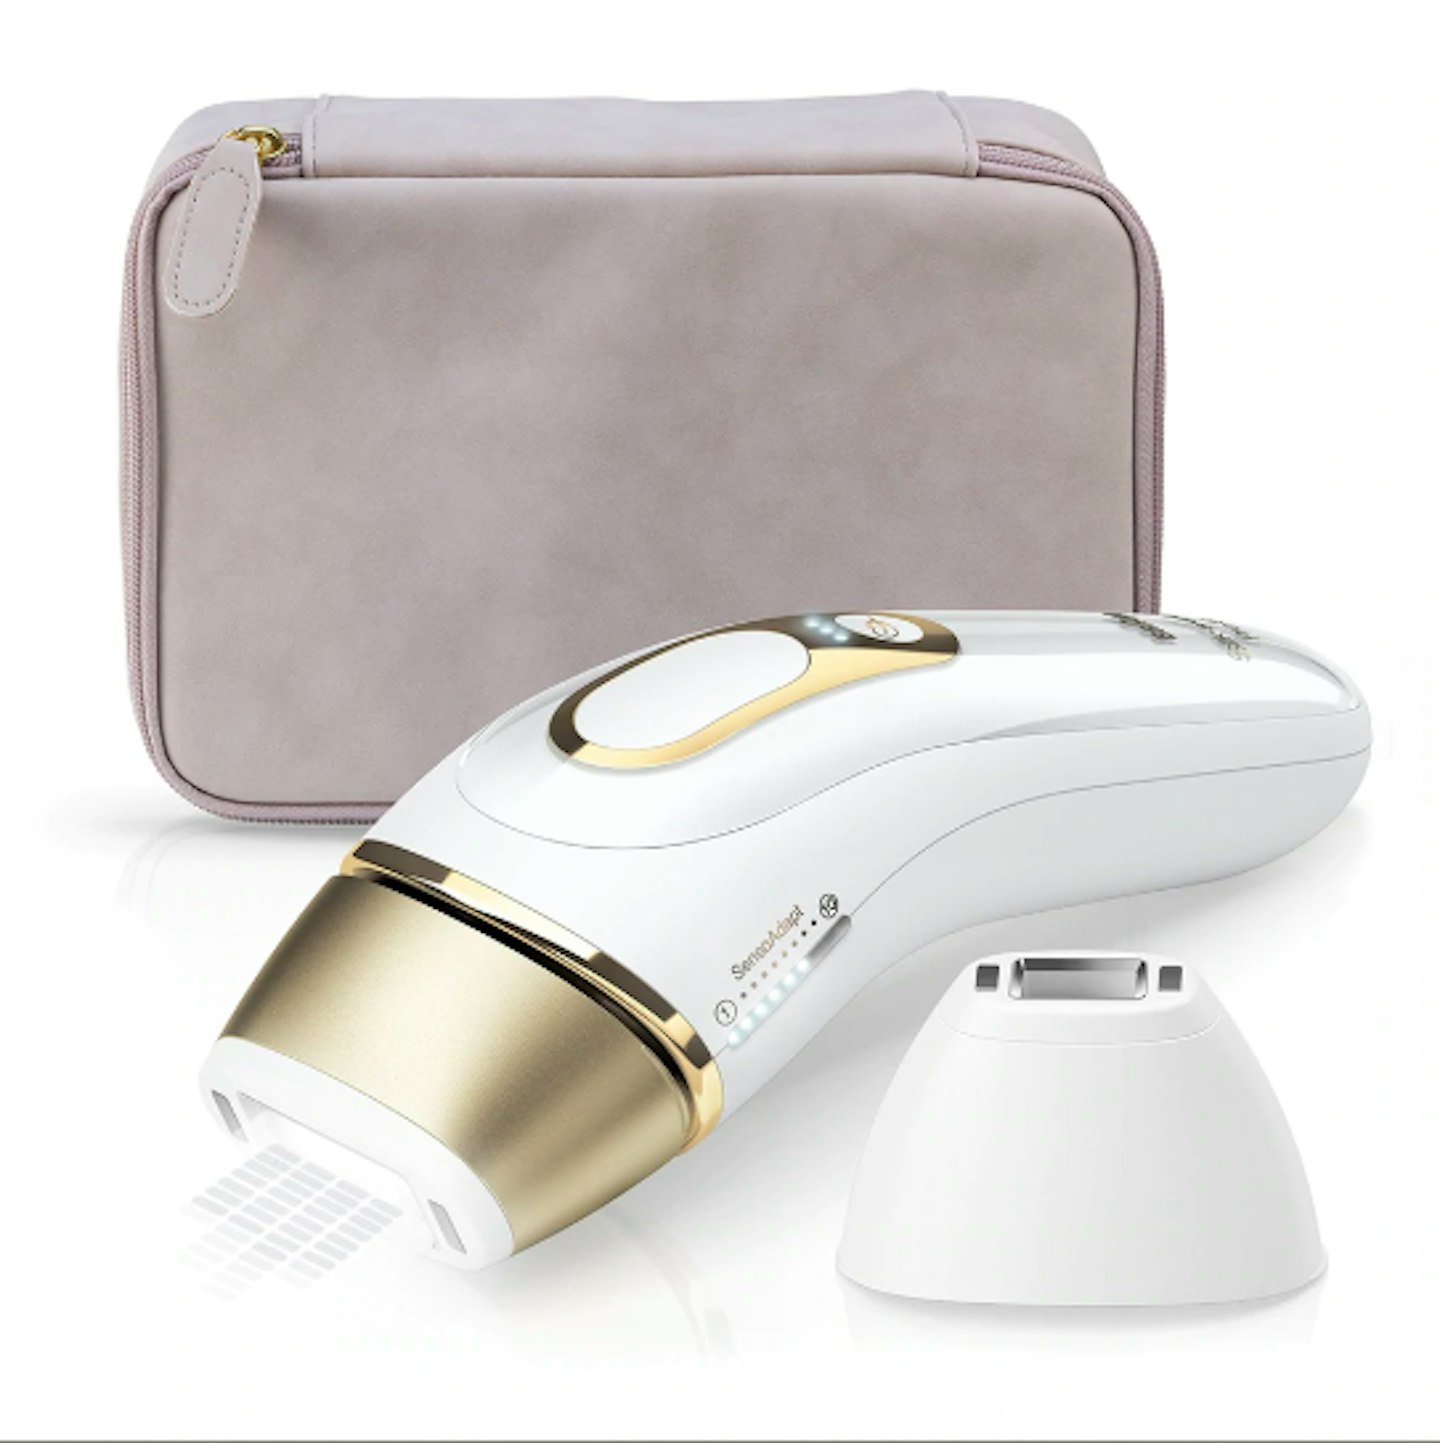 Braun Silk-Expert Pro 5 PL5124 IPL Hair Removal Device, WAS £599.99 NOW £268